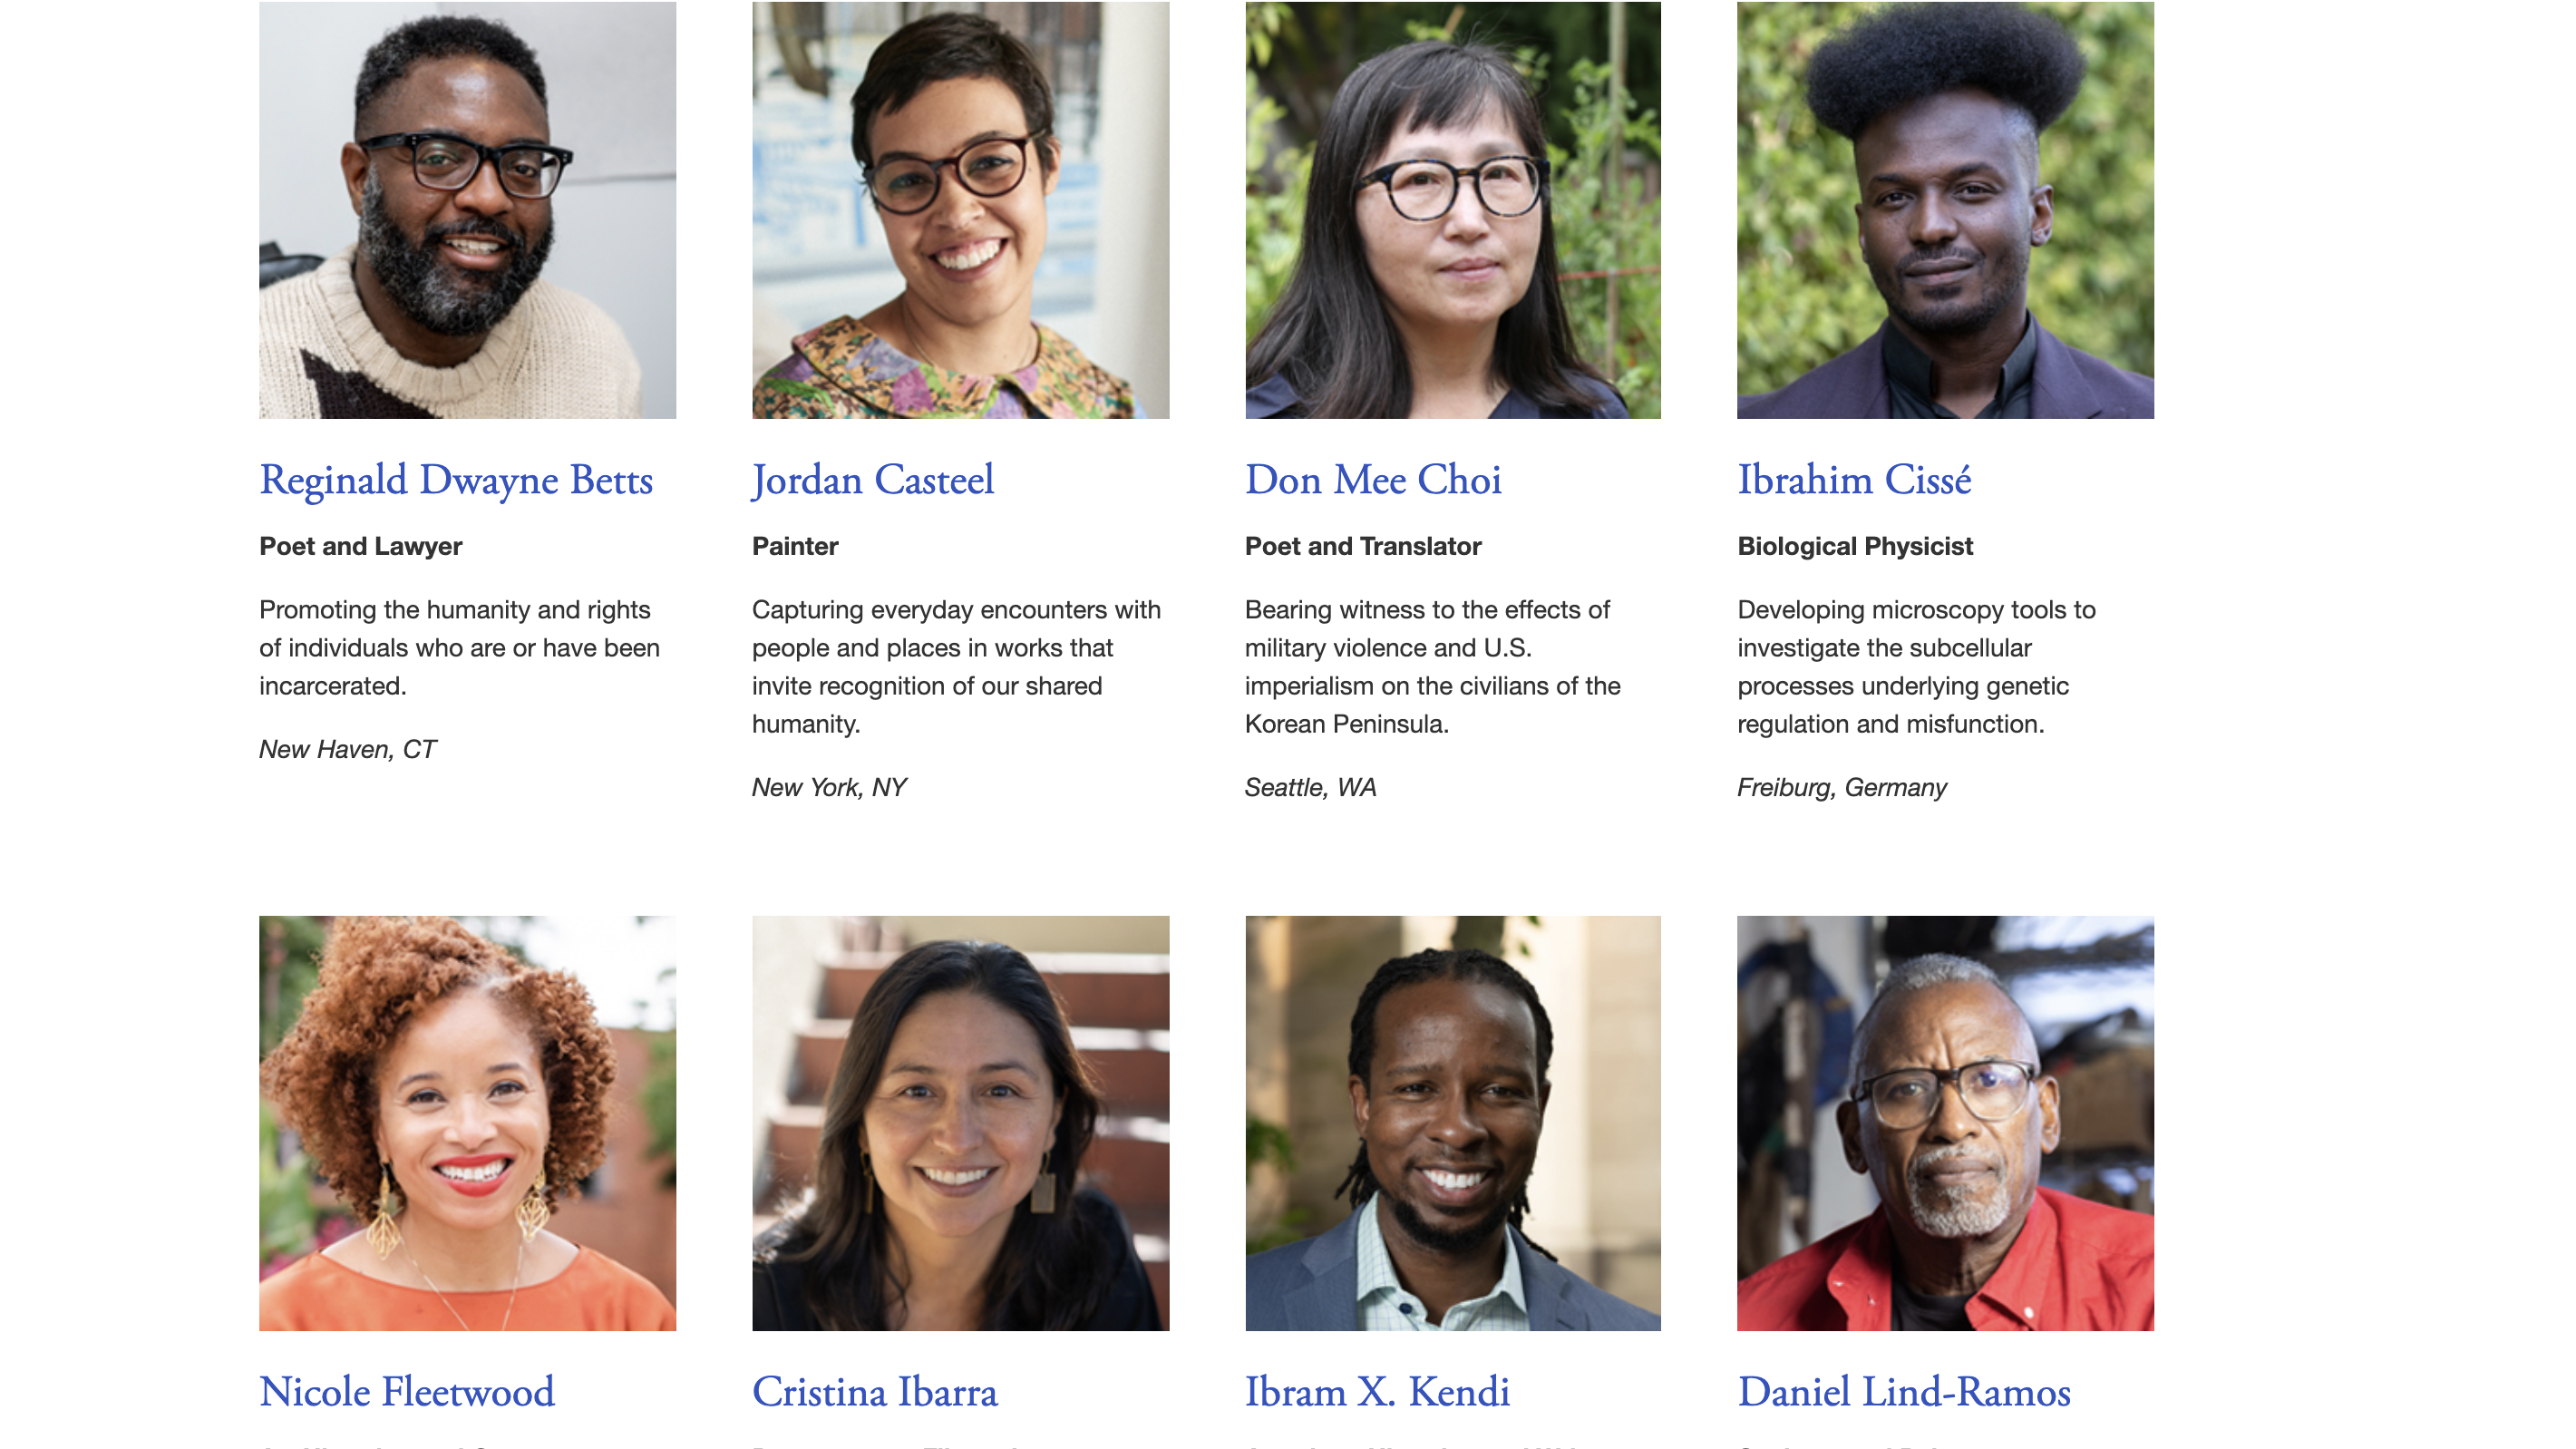 Head Of The Class: Nearly Half Of The 2021 MacArthur “Genius” Grant Winners Are Black